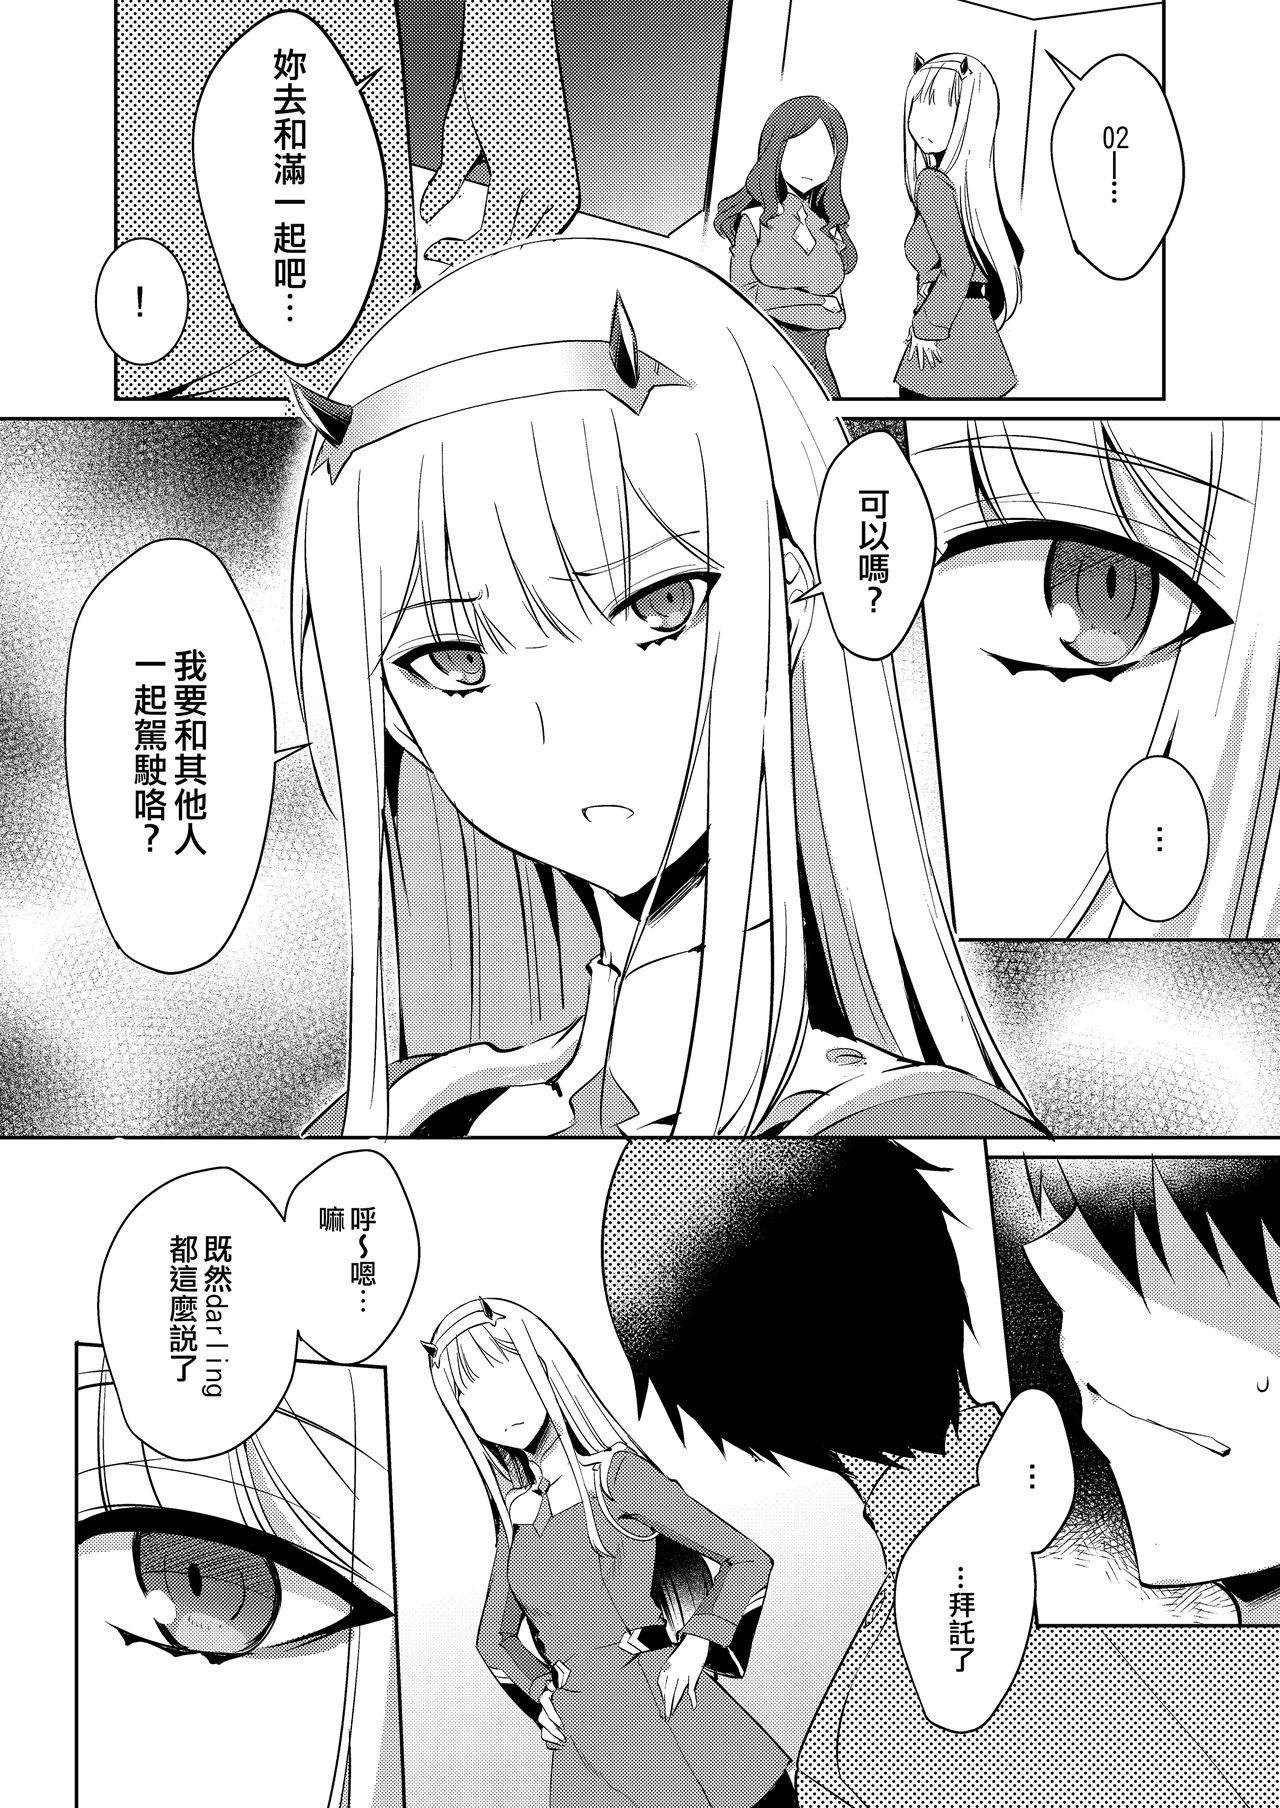 Free Amateur Mitsuru in the Zero Two - Darling in the franxx Amateurs - Page 7